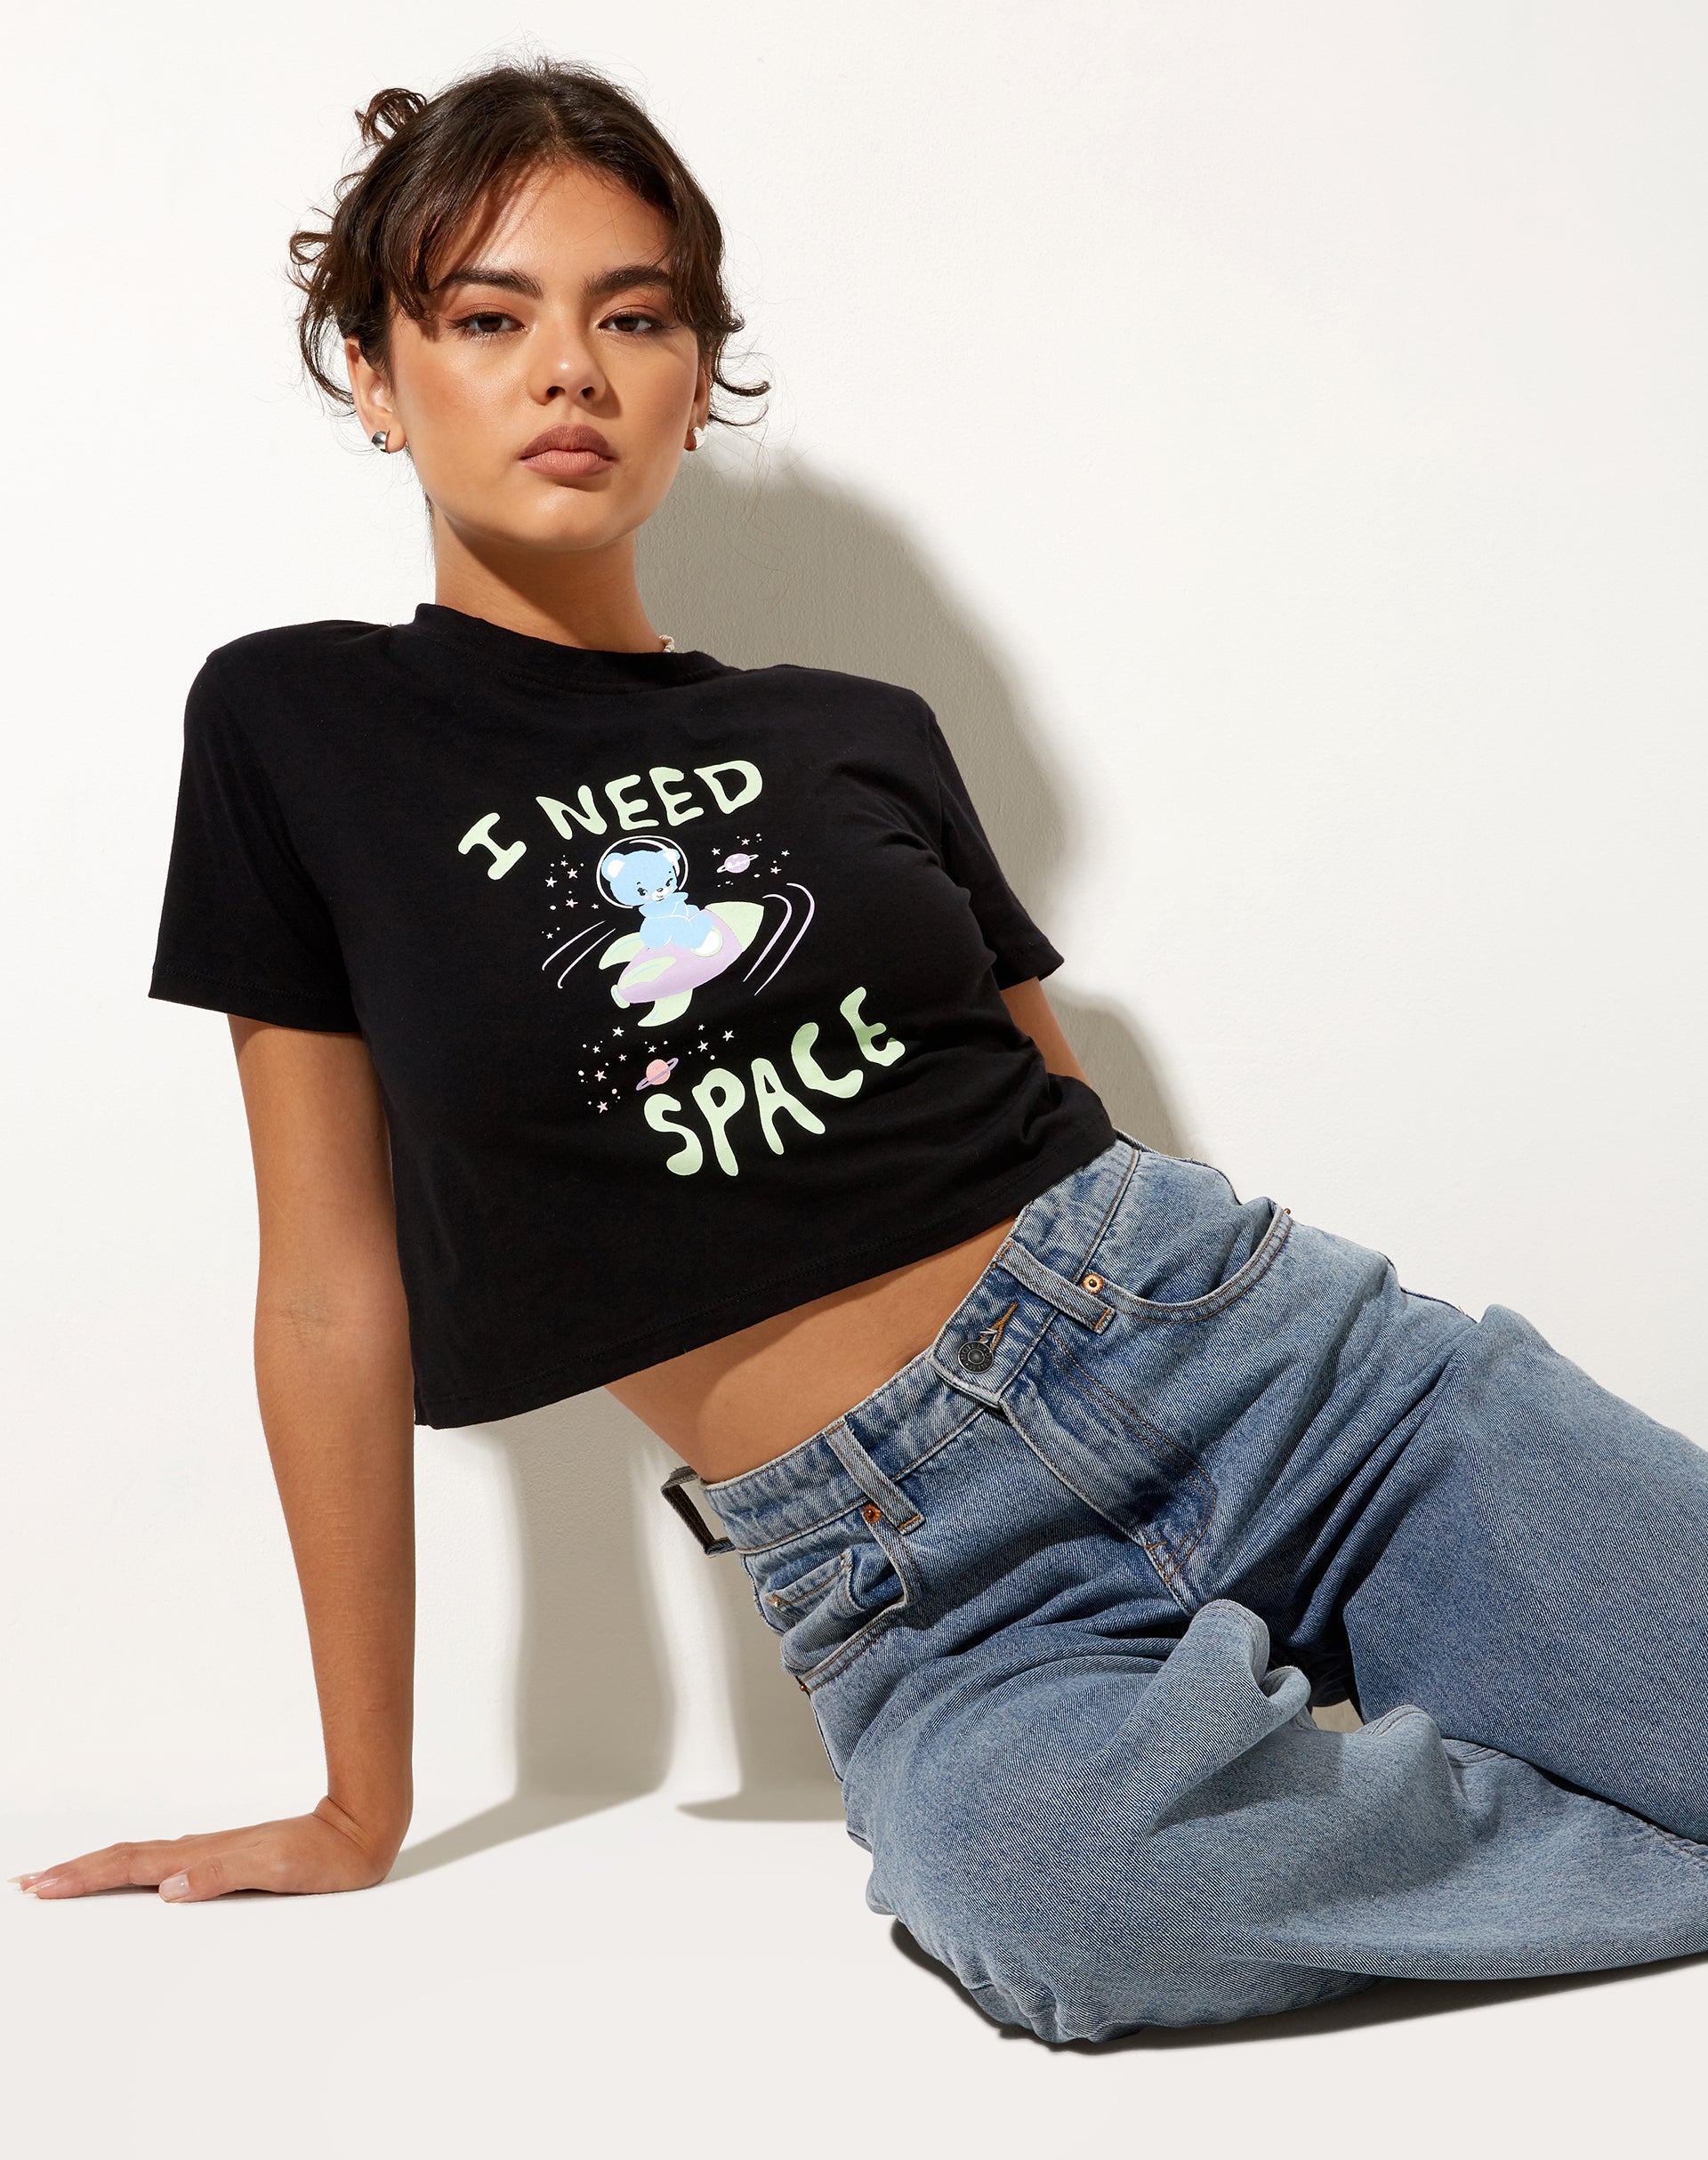 Image of Shrunk Tee in Black I Need Space